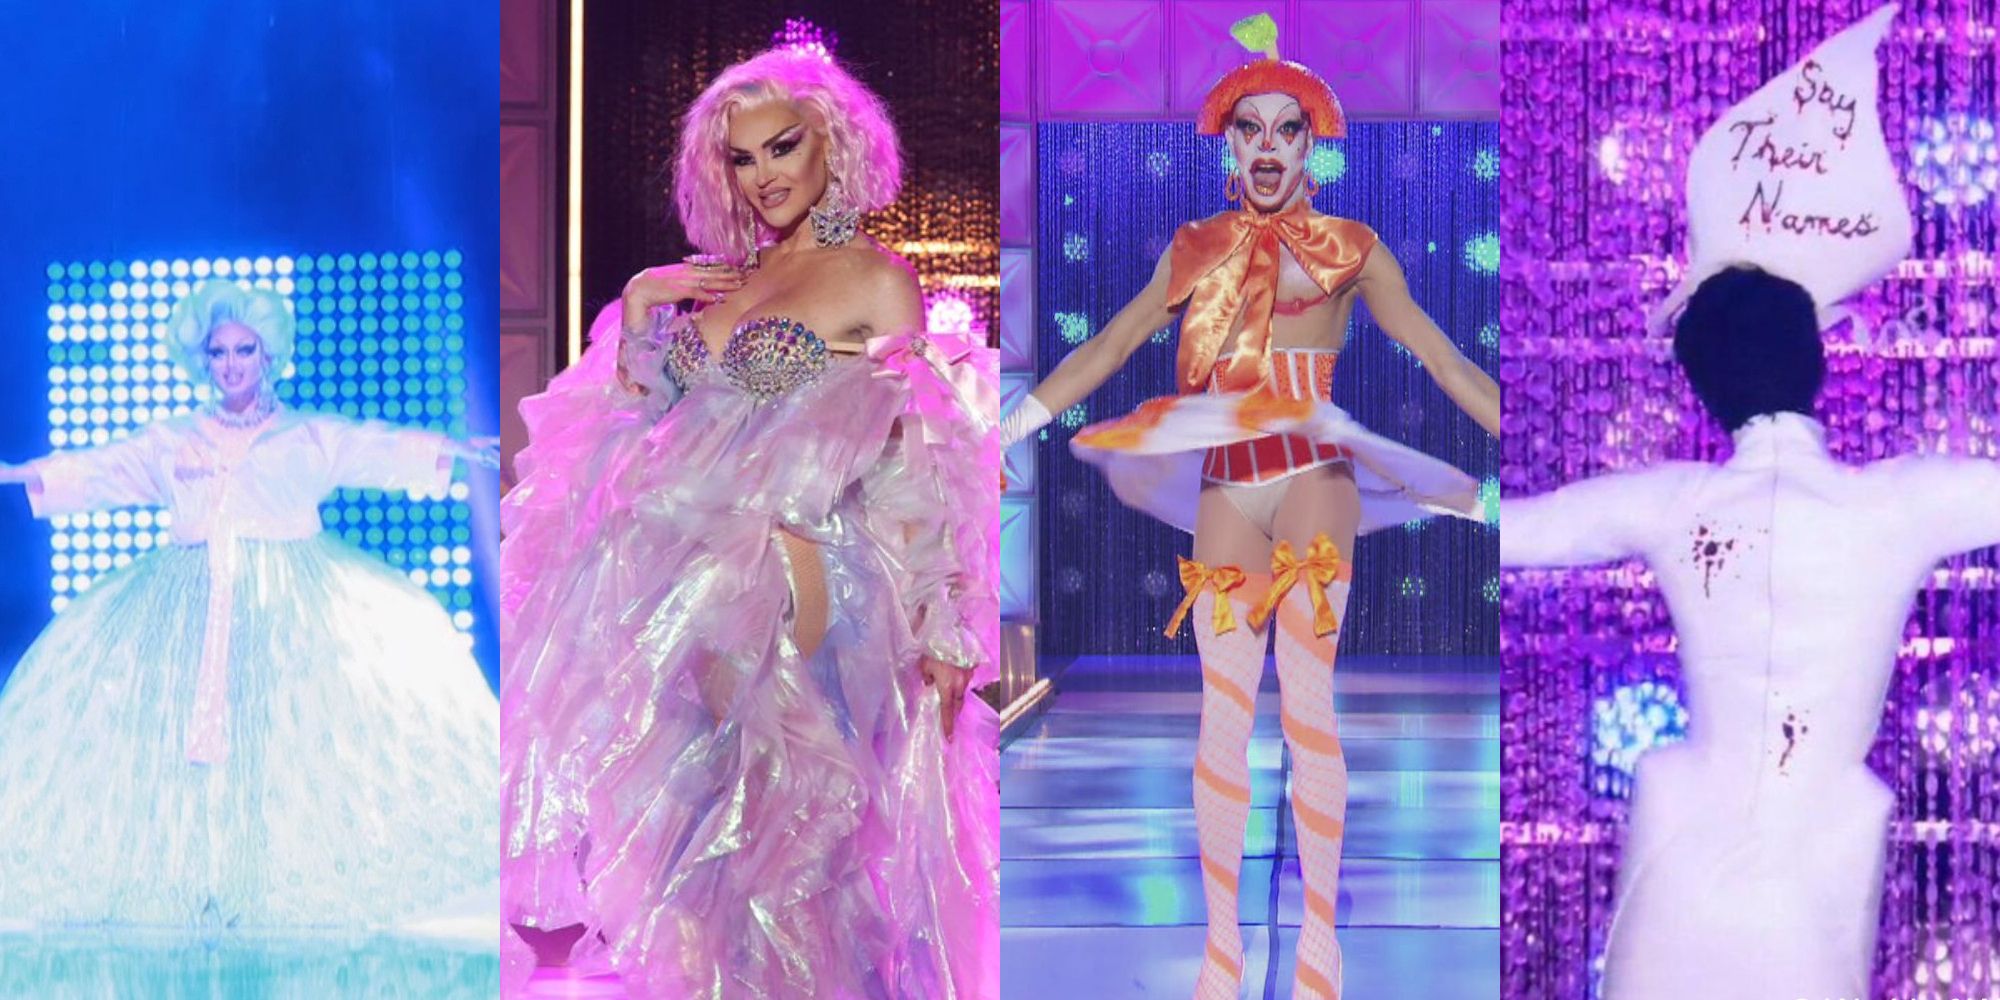 A collage of drag queens, left to right Kim Chi, Kylie Sonique Love, Yvie Oddly, and Symone